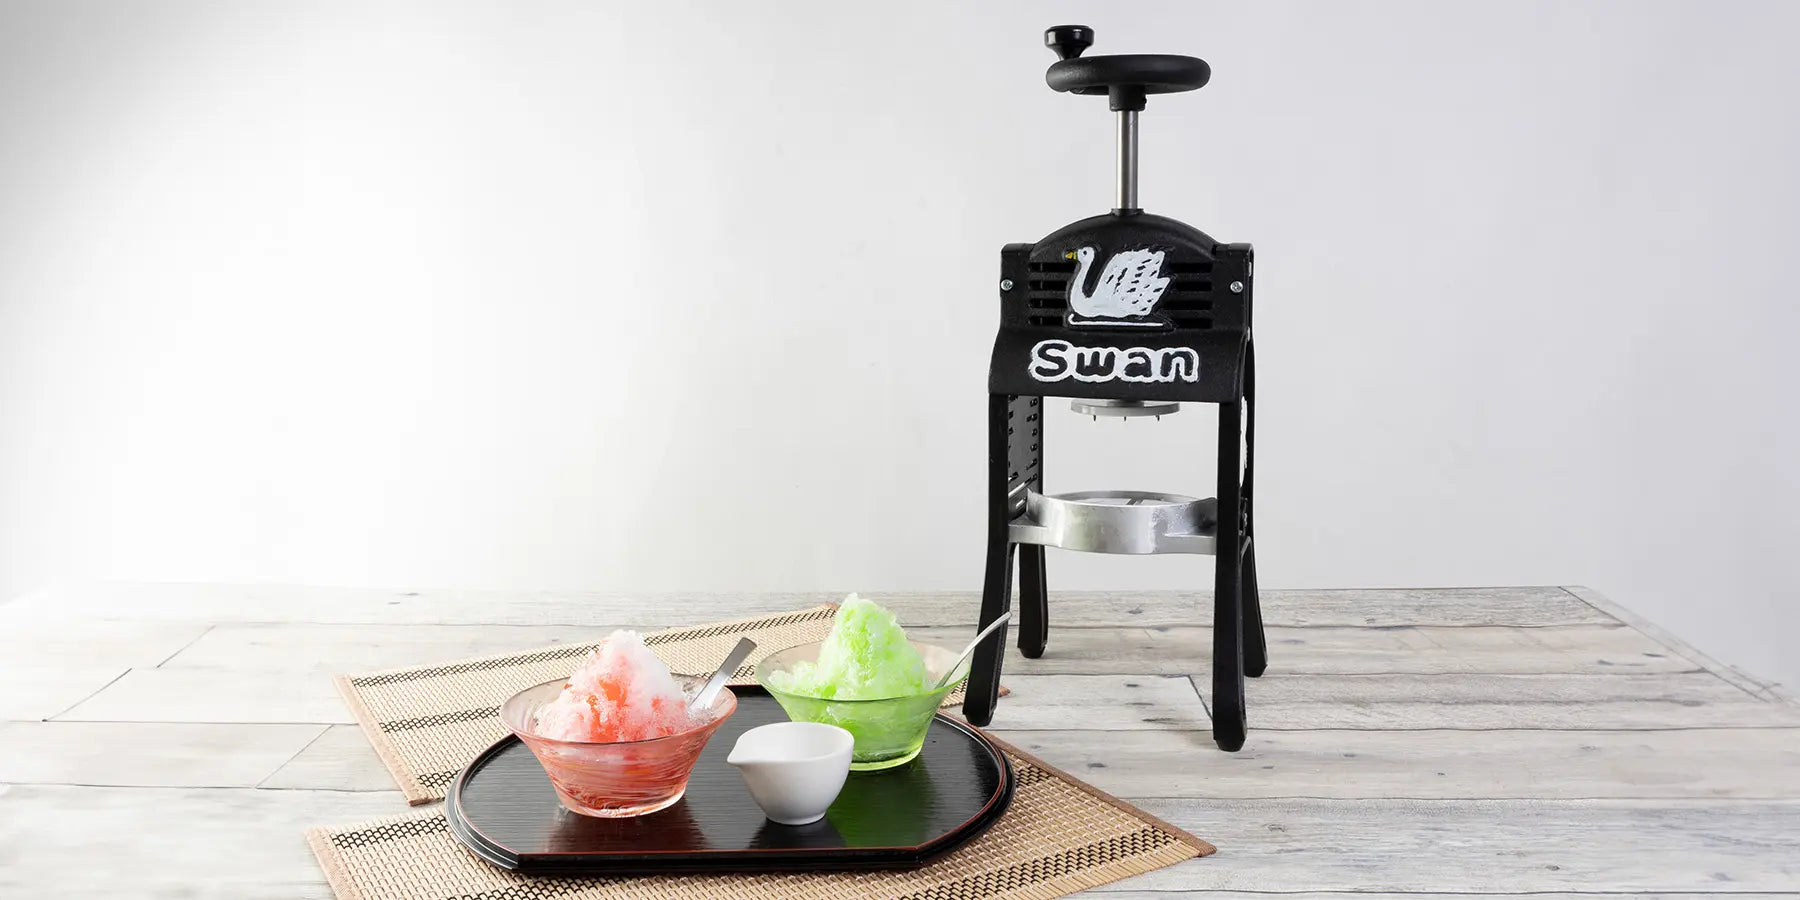 Discover our great selection of Shaved Ice supplies on Globalkitchen Japan.